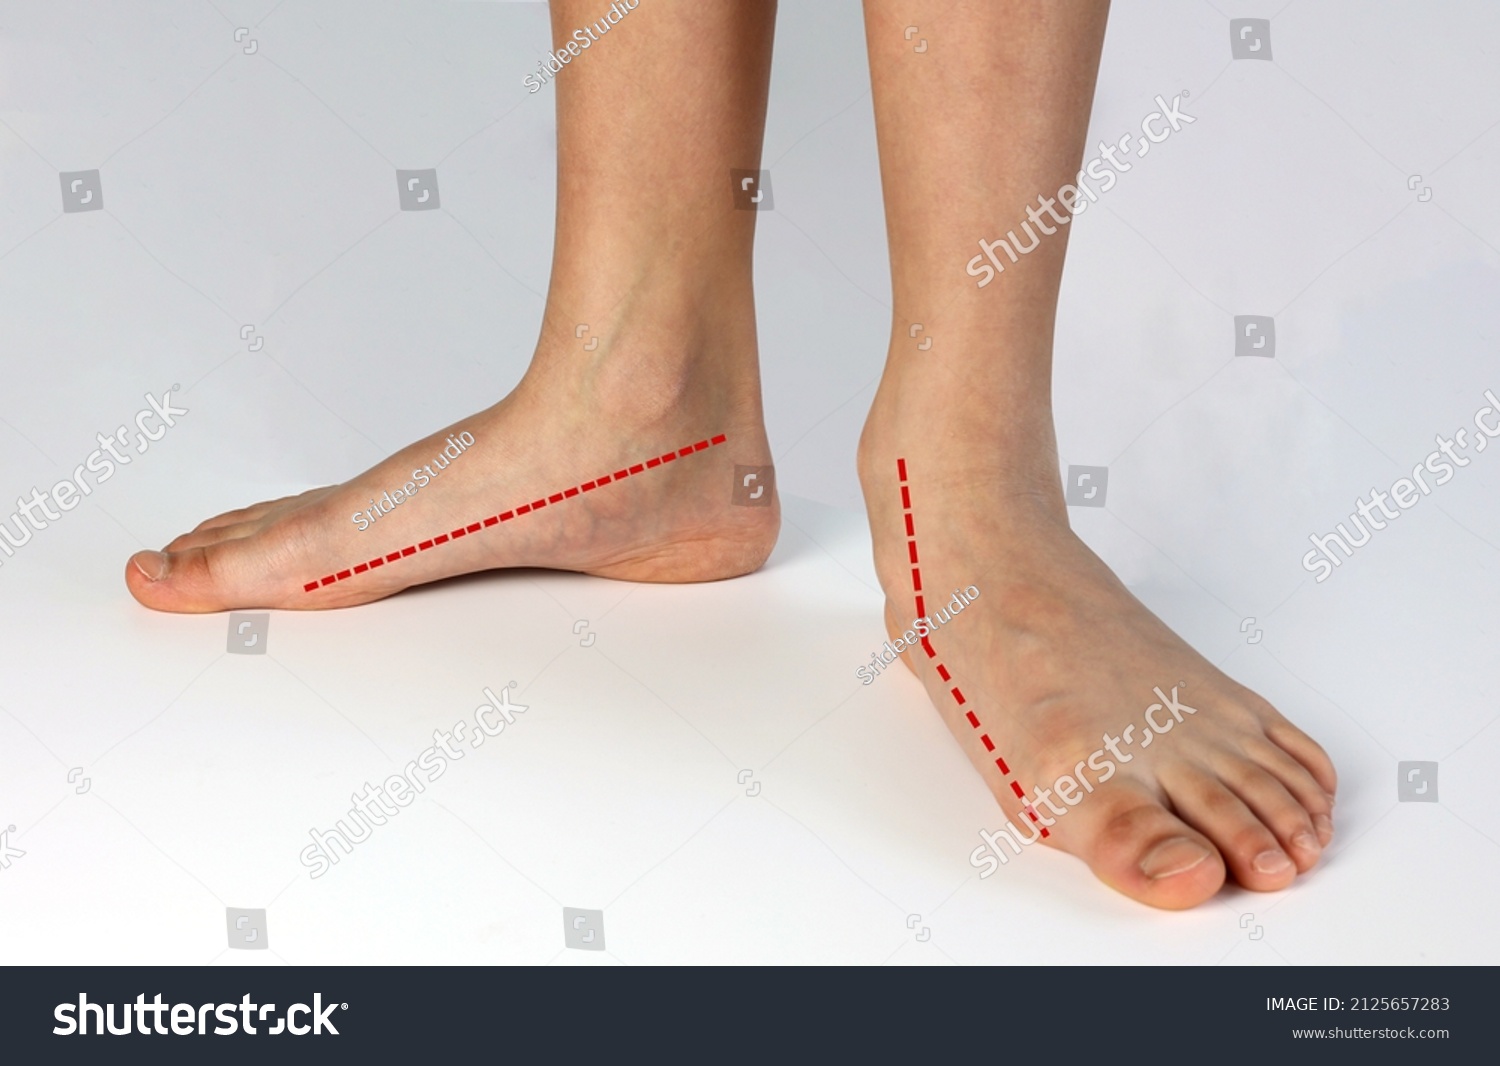 Compare normal healthy foot shape with flat foot fallen arch problem. The red line showing normal shape foot with abnormal shapes foot unstable medial column. #2125657283